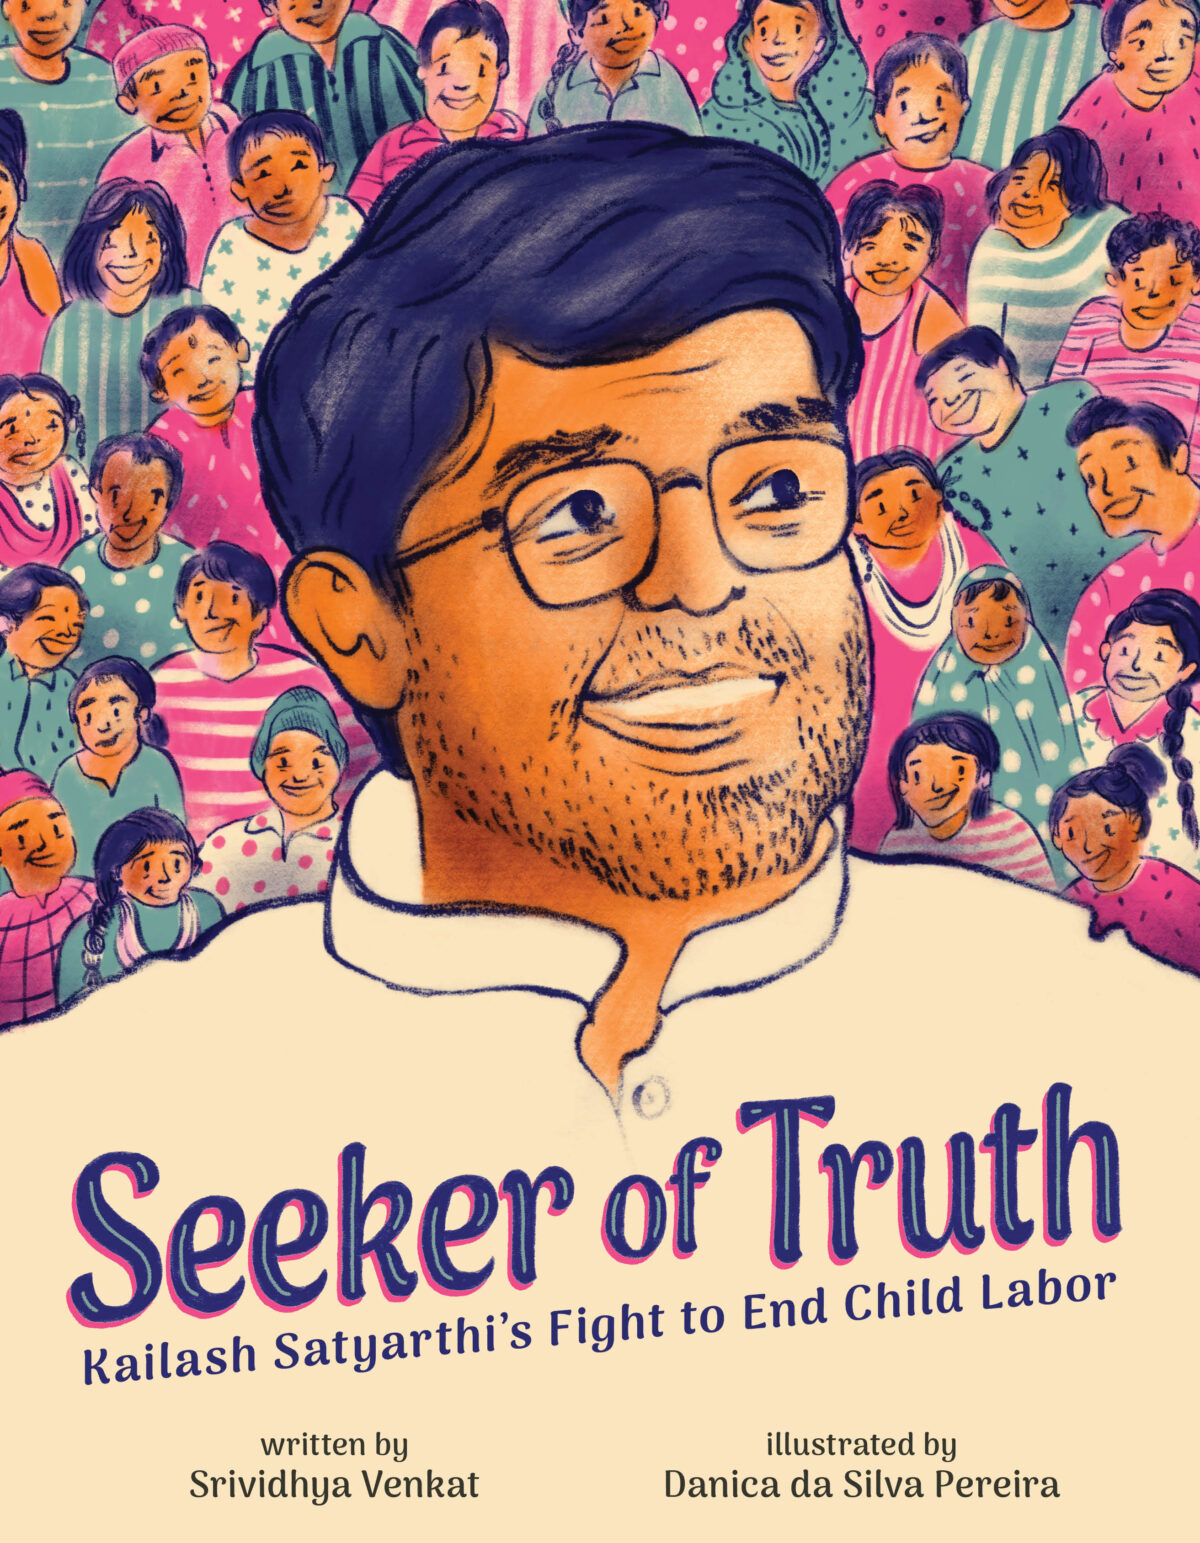 Seeker of Truth: Kailash Satyarthi’s Fight to End Child Labor